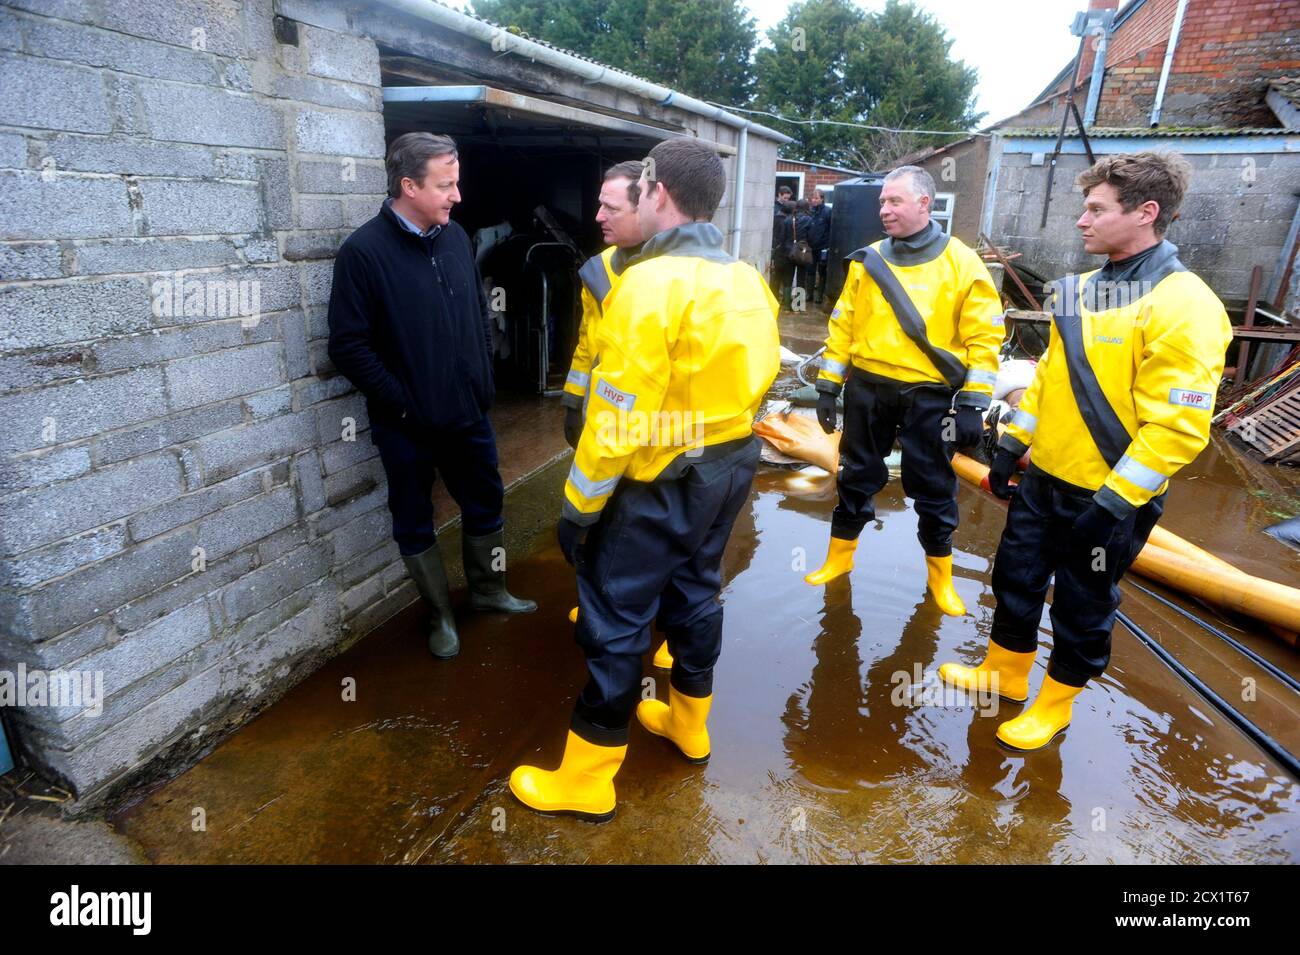 Britain's Prime Minister David Cameron talks with emergency service workers during a visit to a flood affected area at Goodings Farm in Fordgate, Somerset February 7, 2014.    REUTERS/Tim Ireland/Pool (BRITAIN - Tags: DISASTER POLITICS ENVIRONMENT) Stock Photo